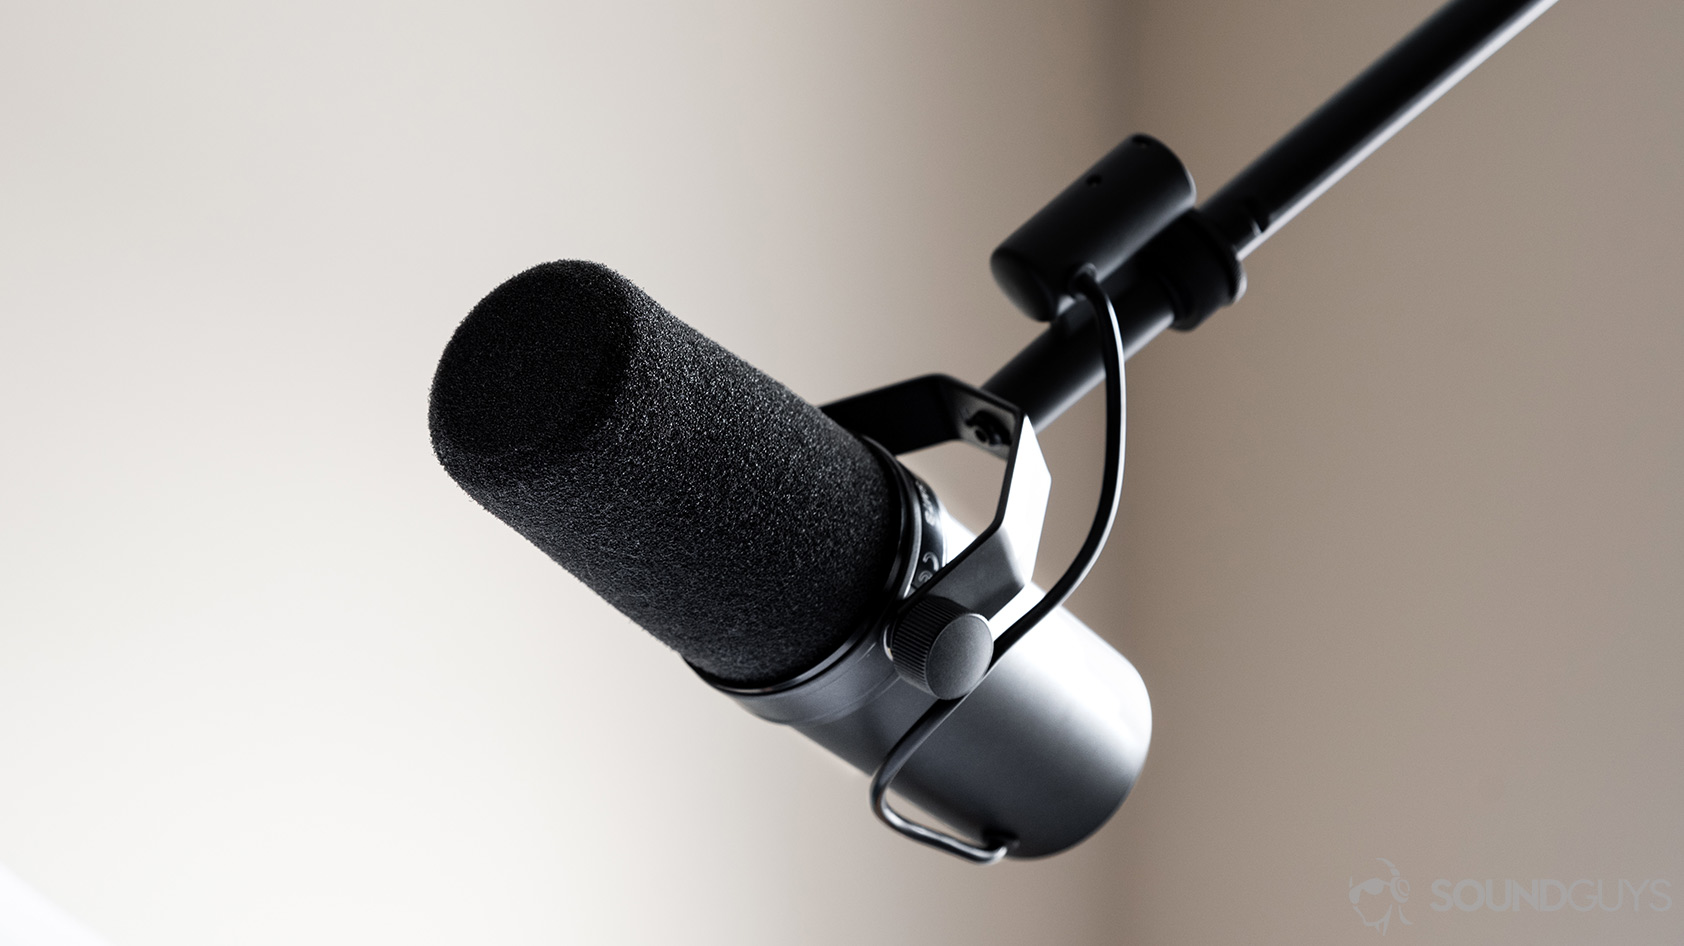 What is the Podcasters Microphone of Choice